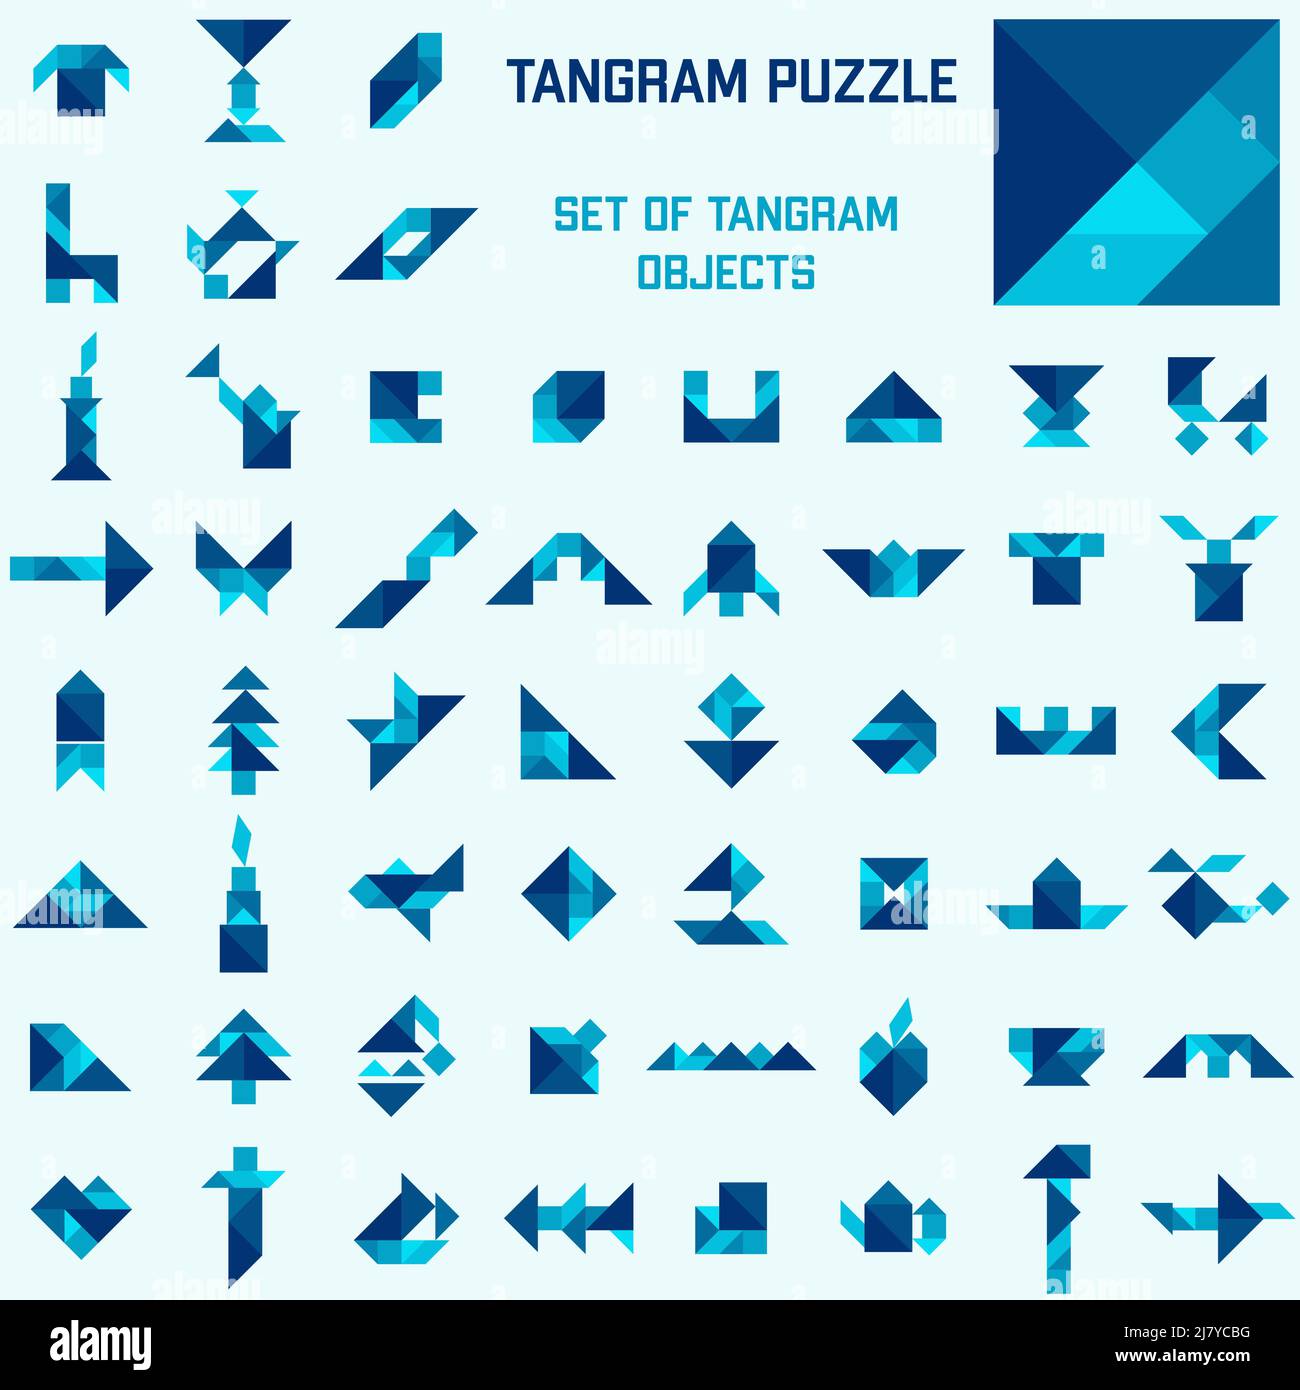 Tangram puzzle. Set of tangram different objects. Stock Vector